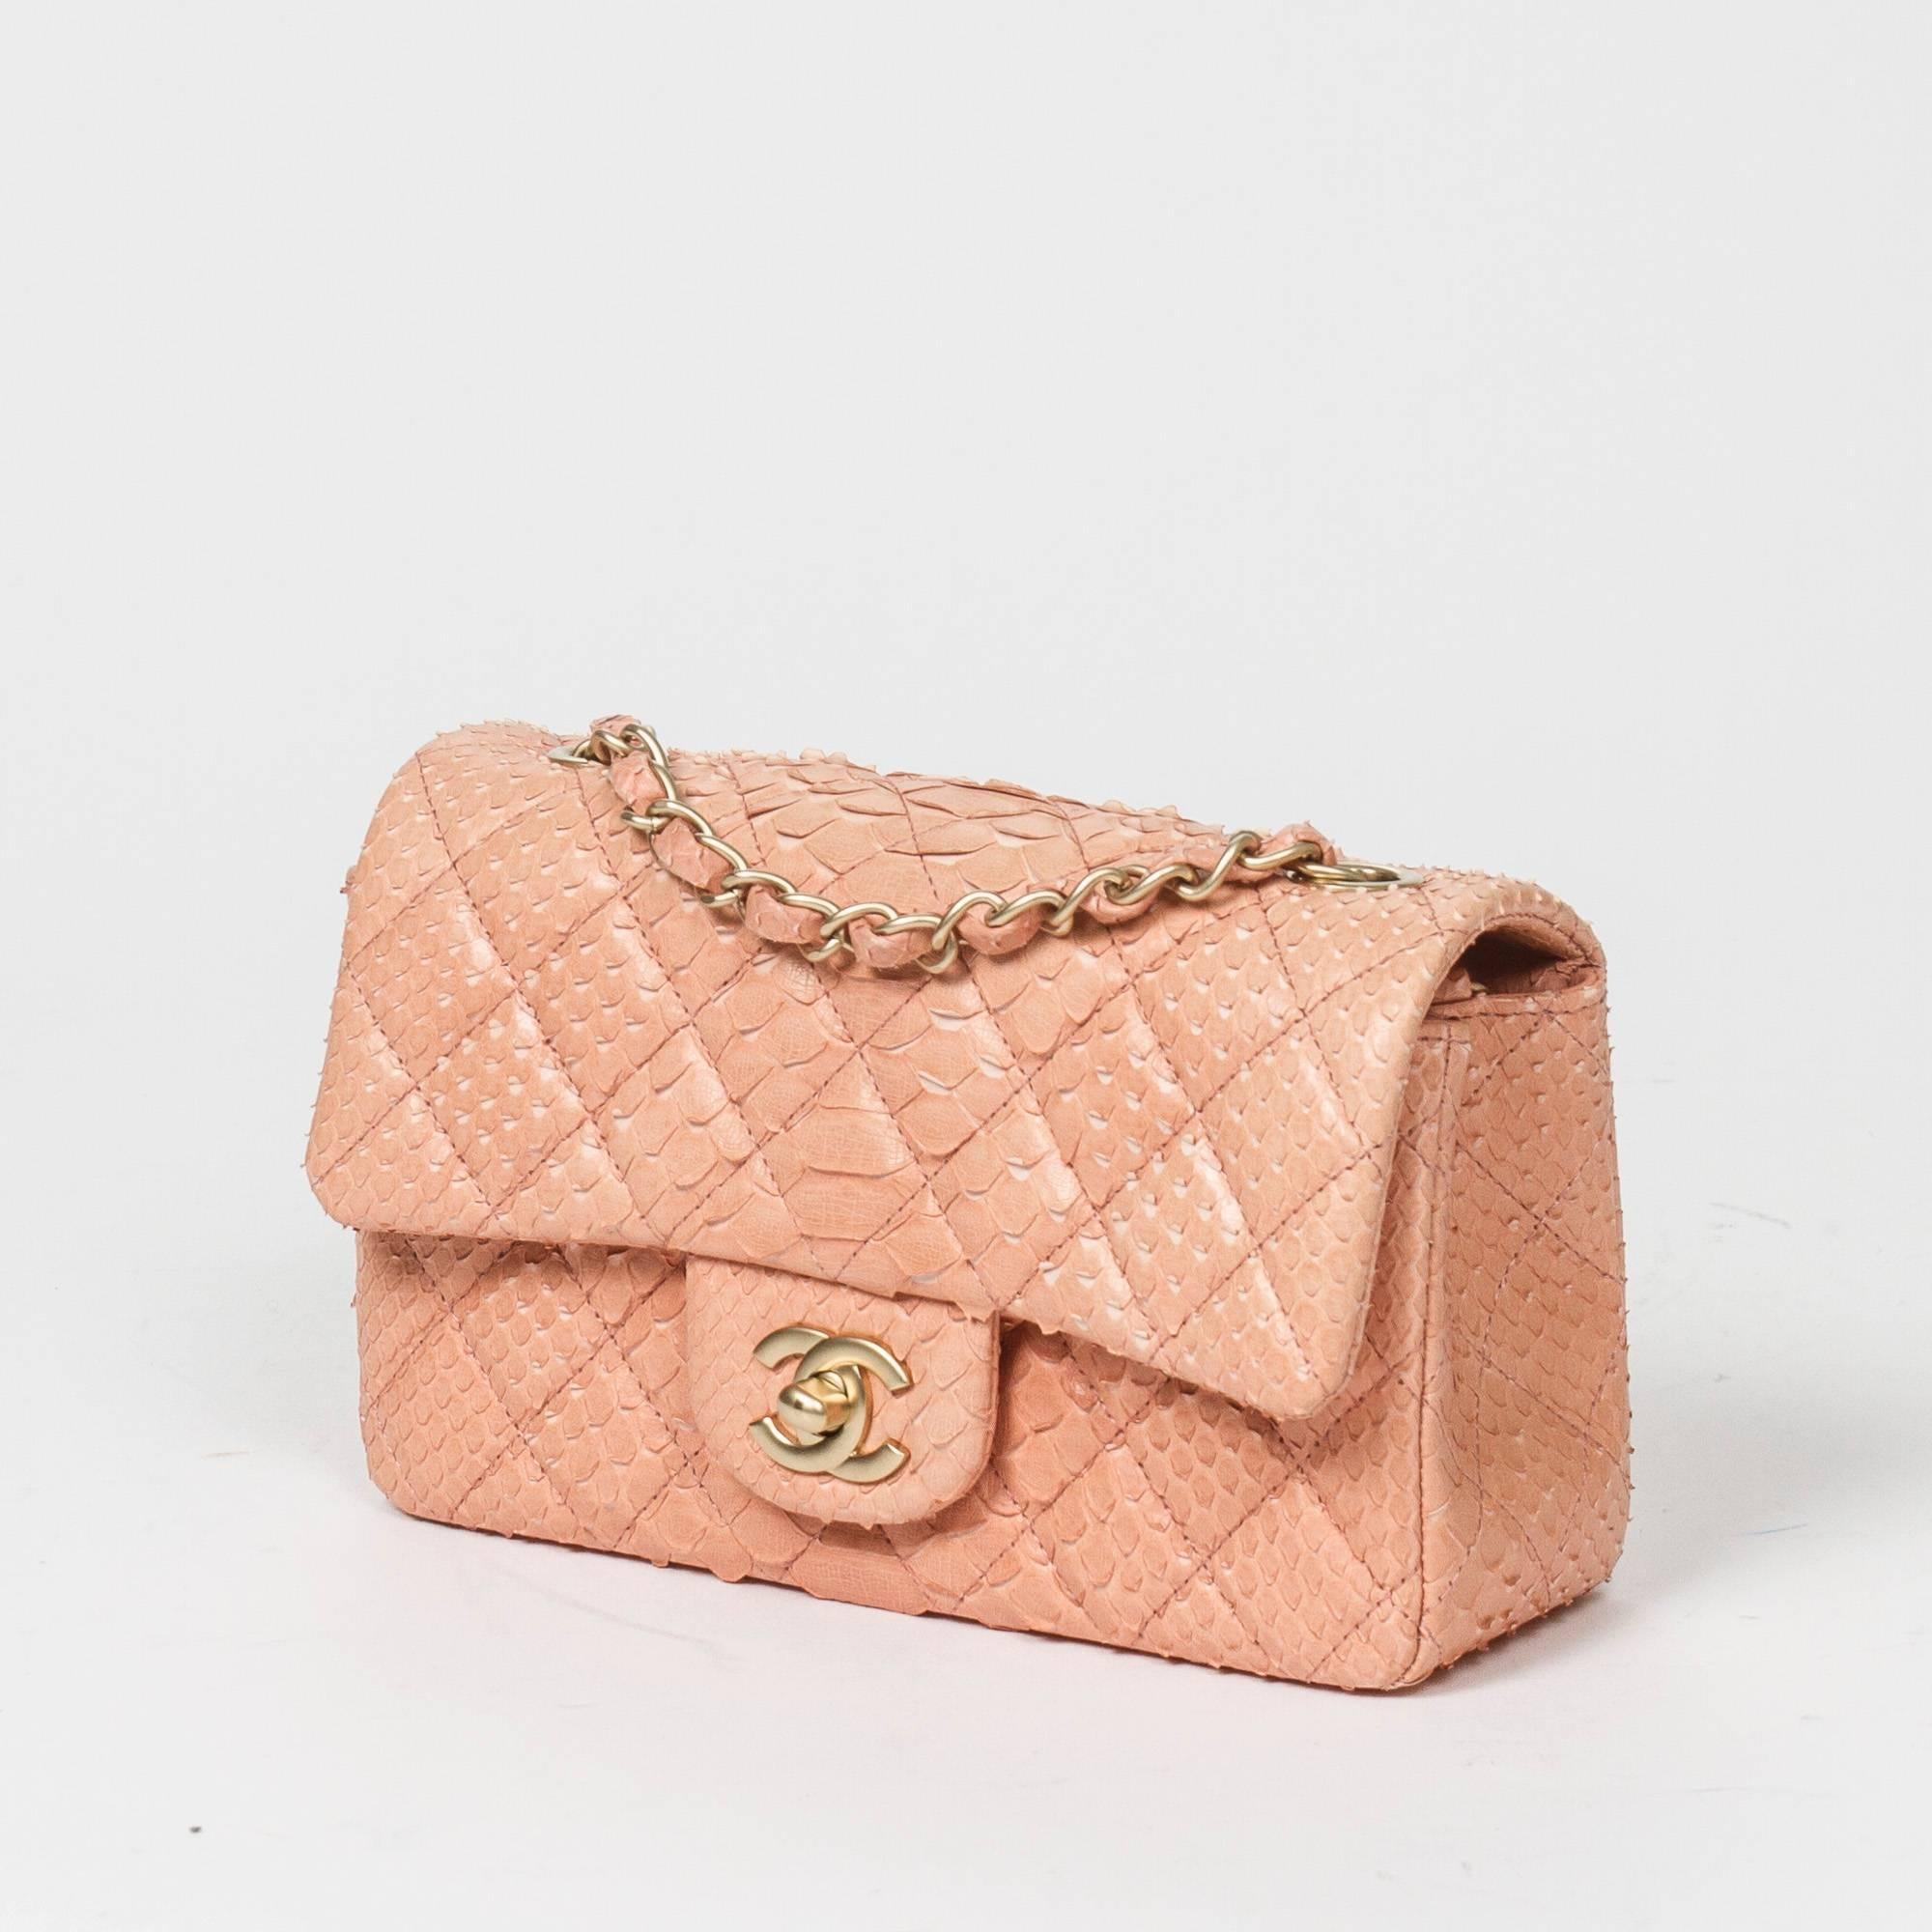 Mini Flap Bag in soft pink python skin, long chain strap interlaced with python skin and signature CC turlock, brushed champaign gold hardware. Back slip pocket. Light pink leather lined interior with one slip pocket and zip pocket. Metal plaque